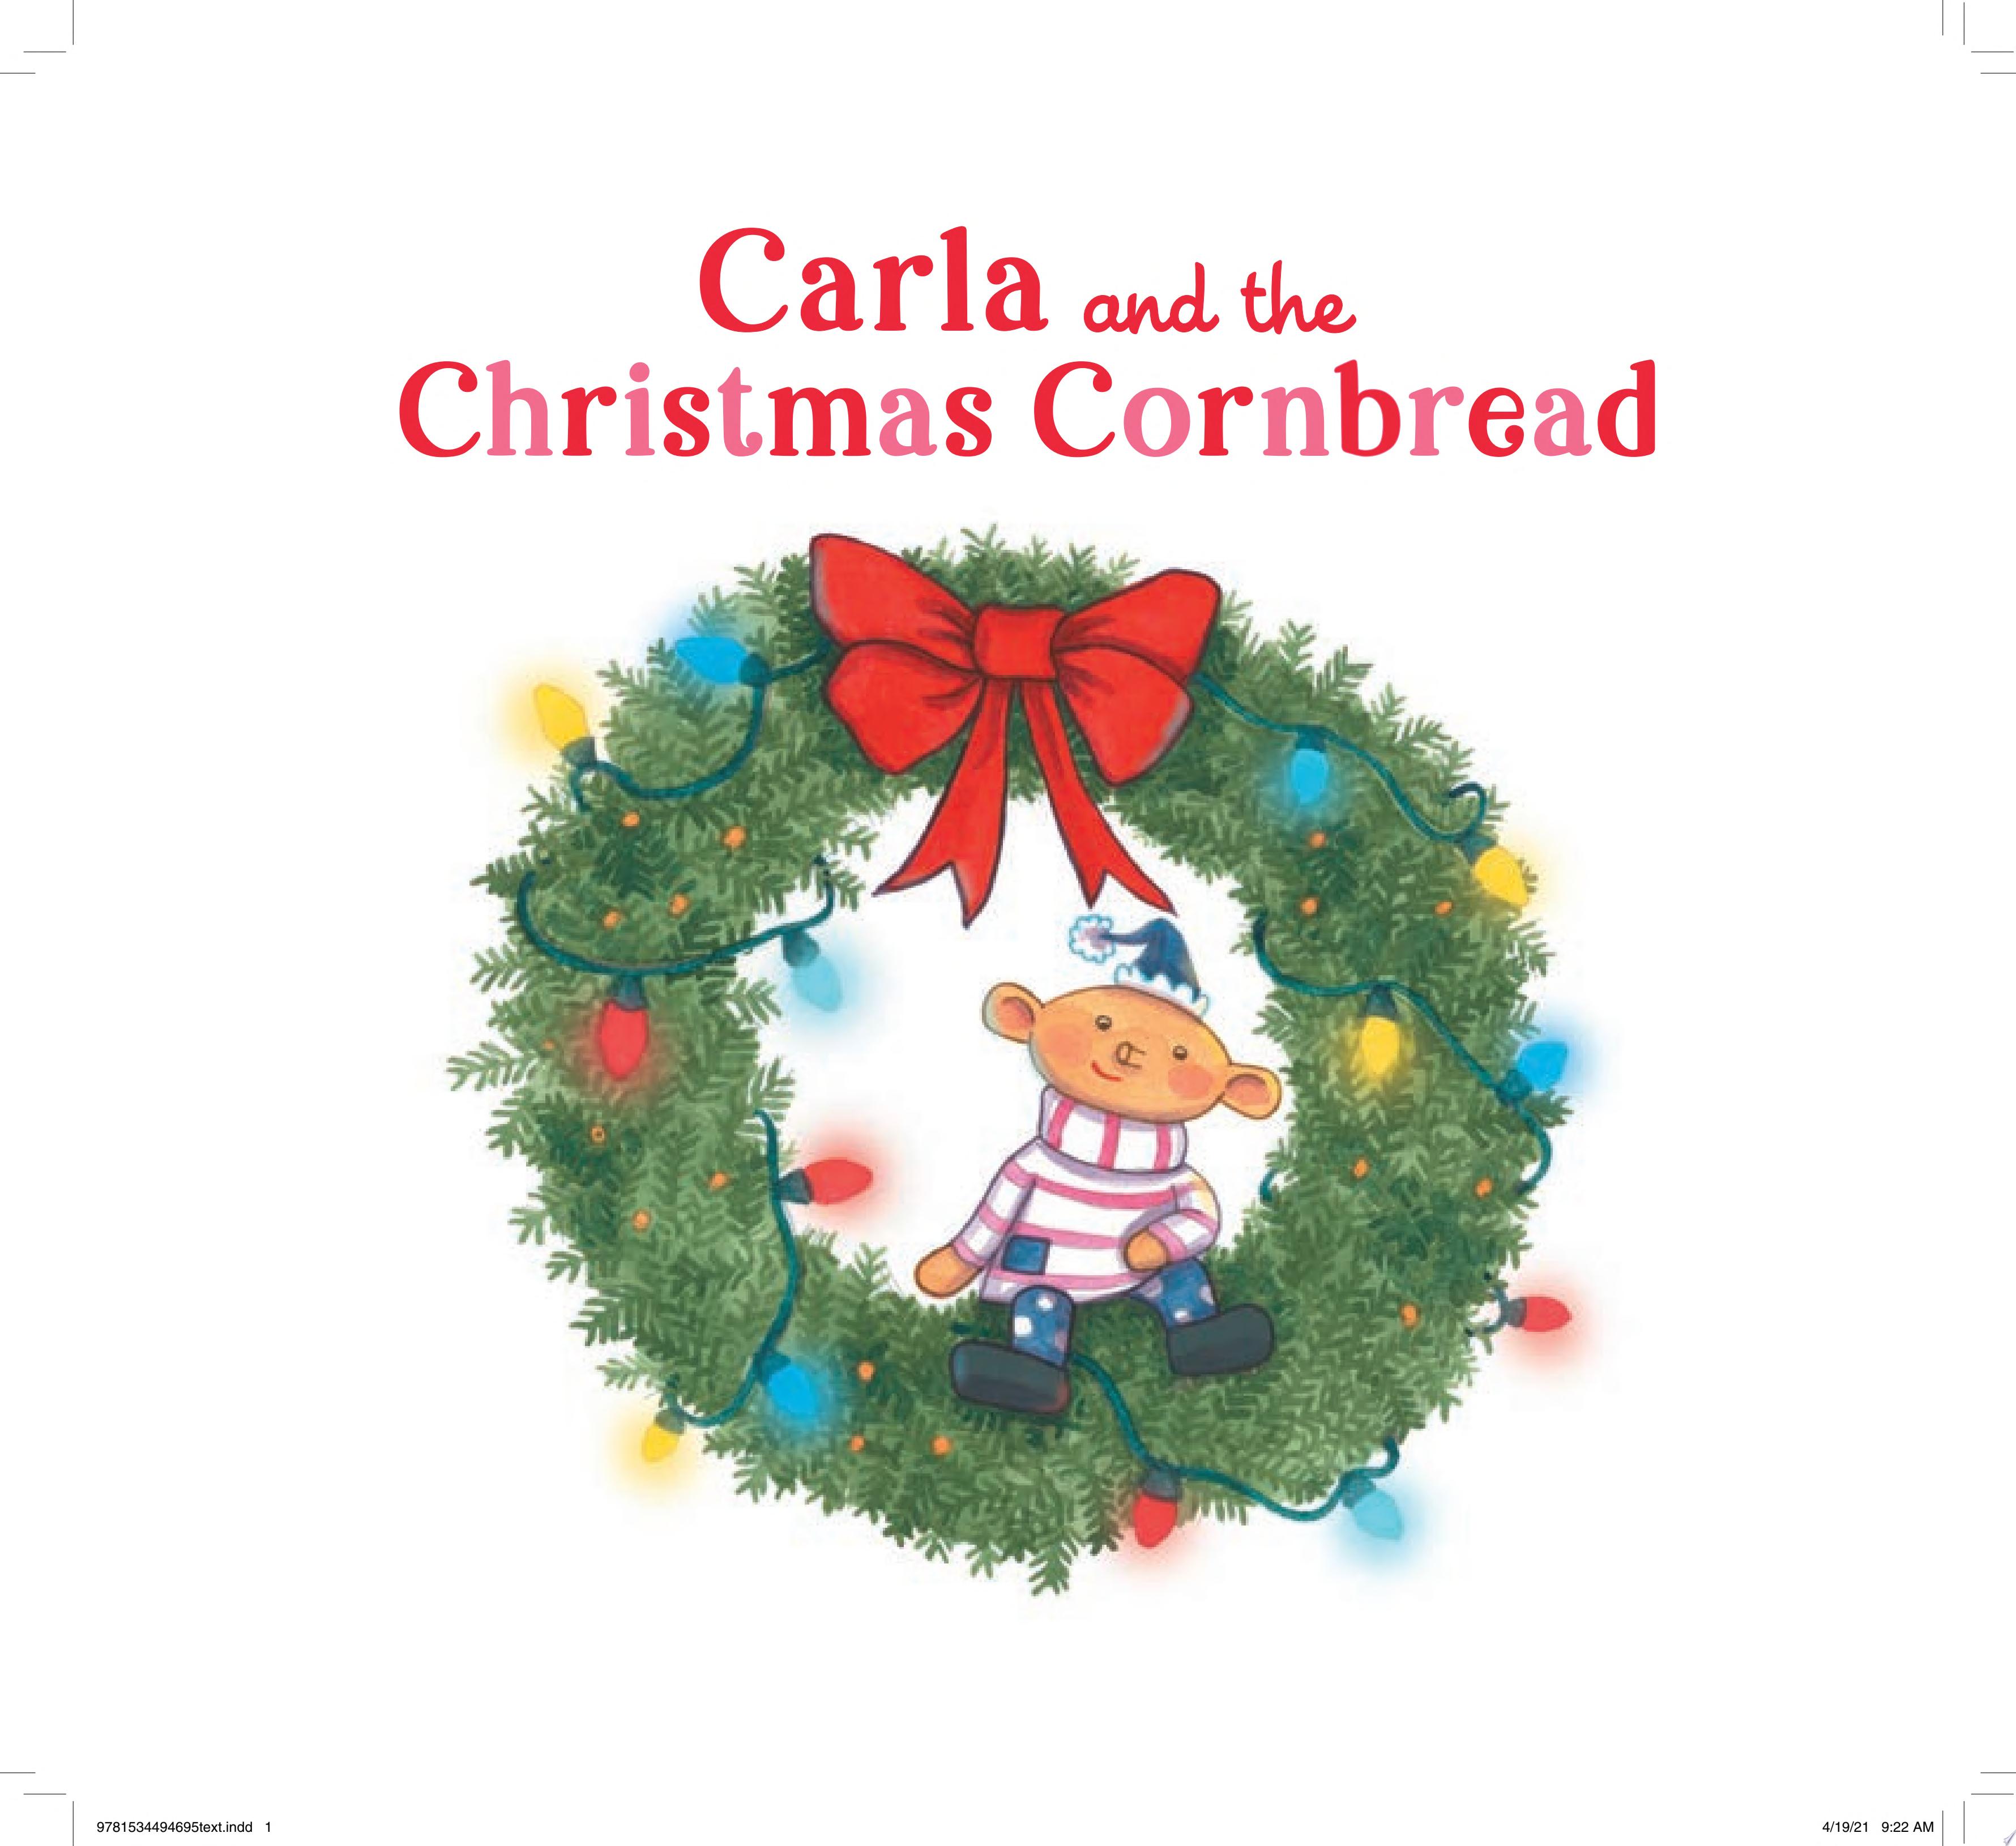 Image for "Carla and the Christmas Cornbread"